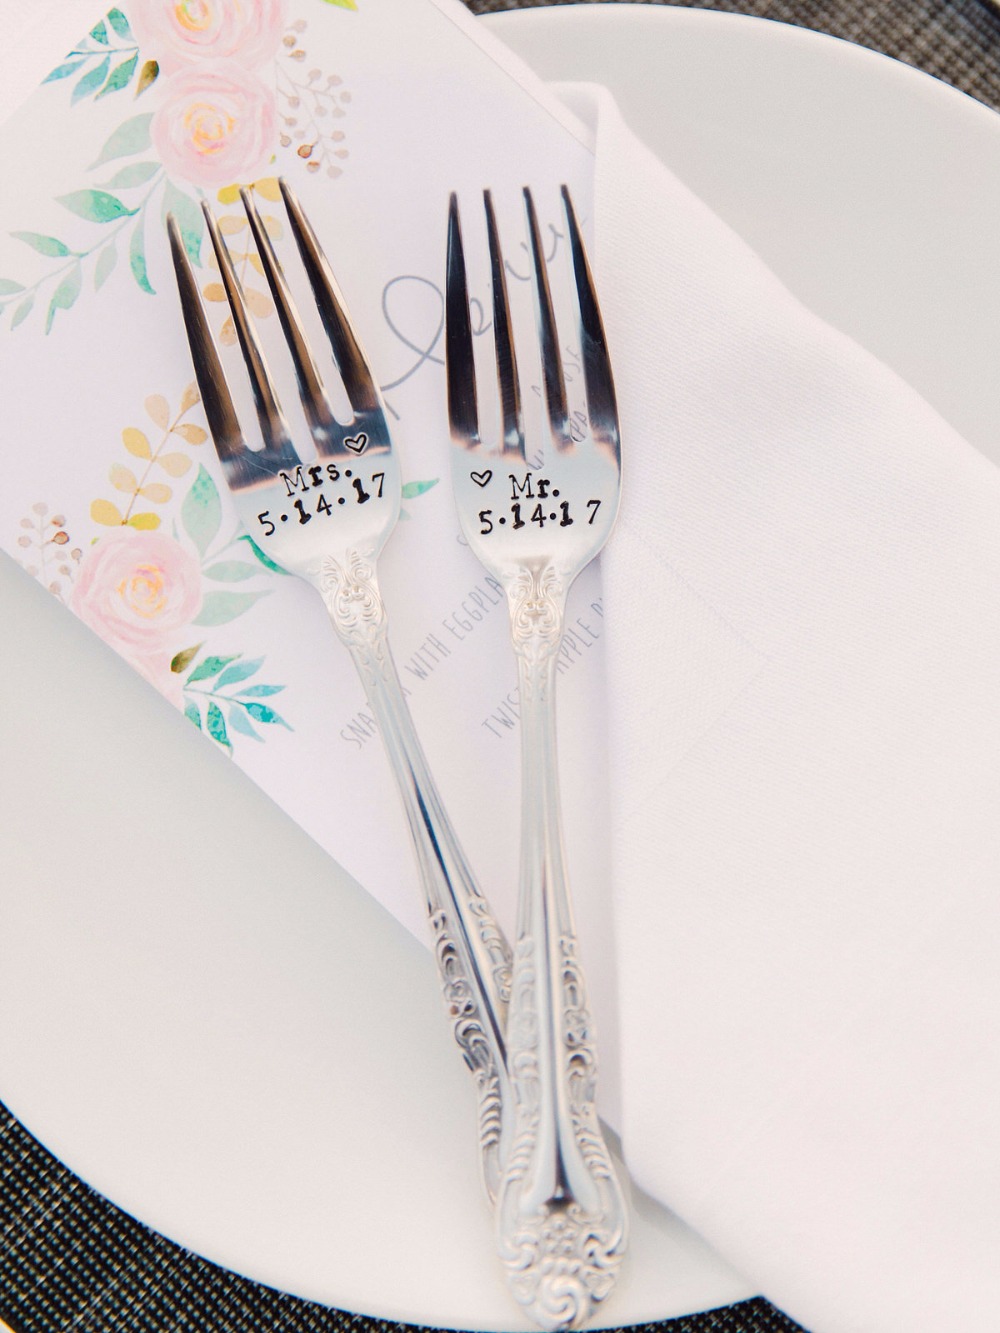 Custom Mr. and Mrs. forks with wedding date